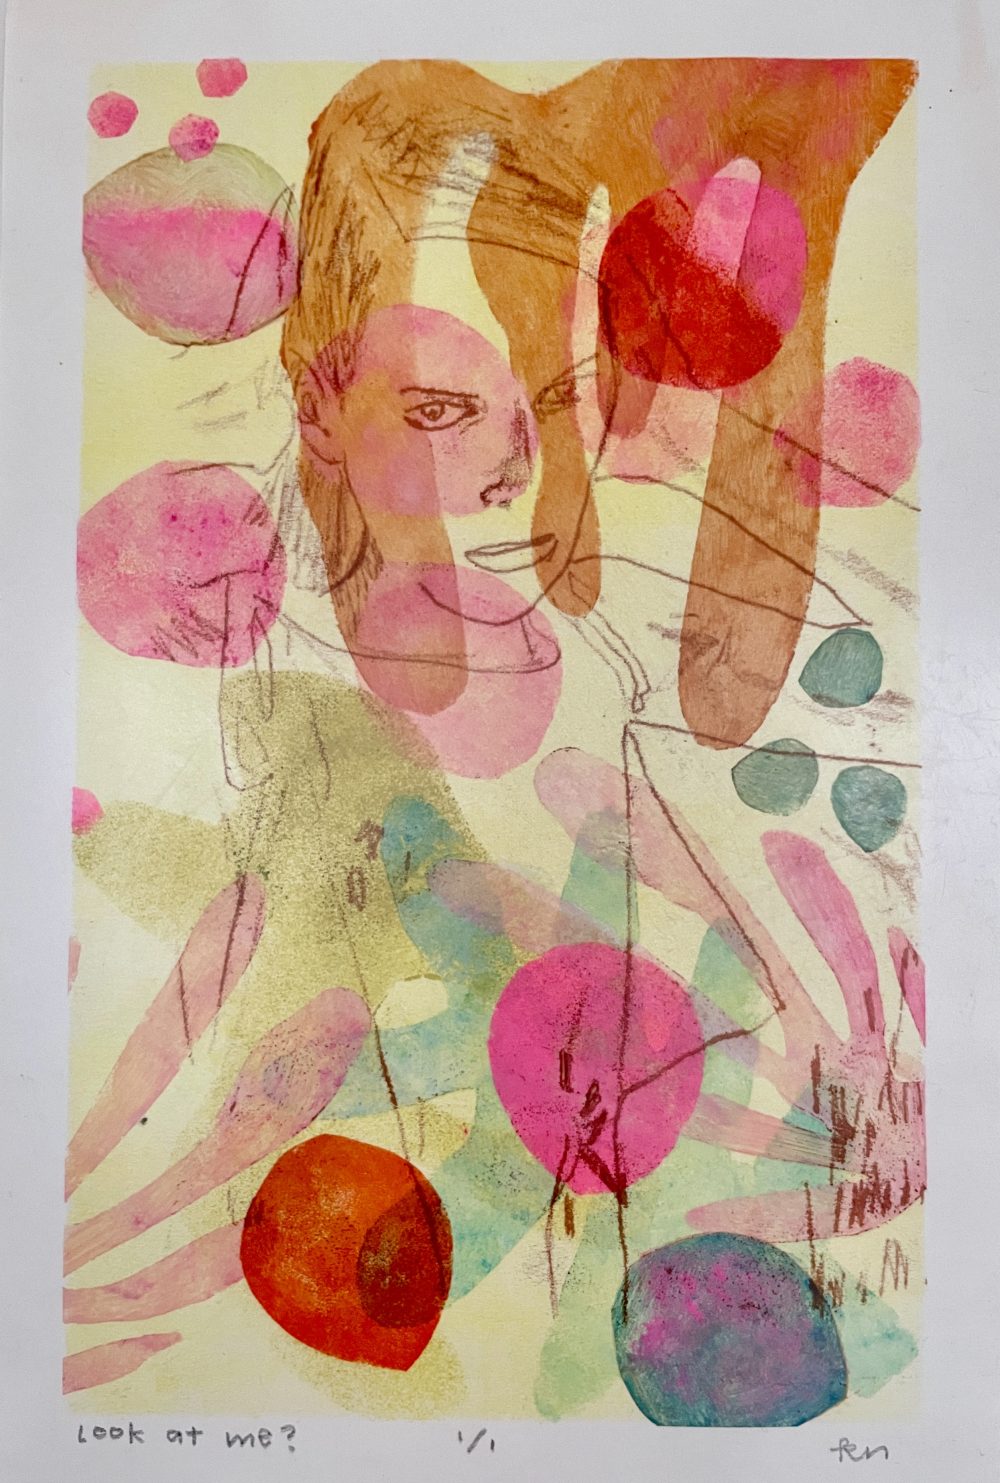 A print with various geometric shapes in bright colors like pink, orange and blue with a monotype drawing of a woman in a dark brown ink, staring at the viewer.